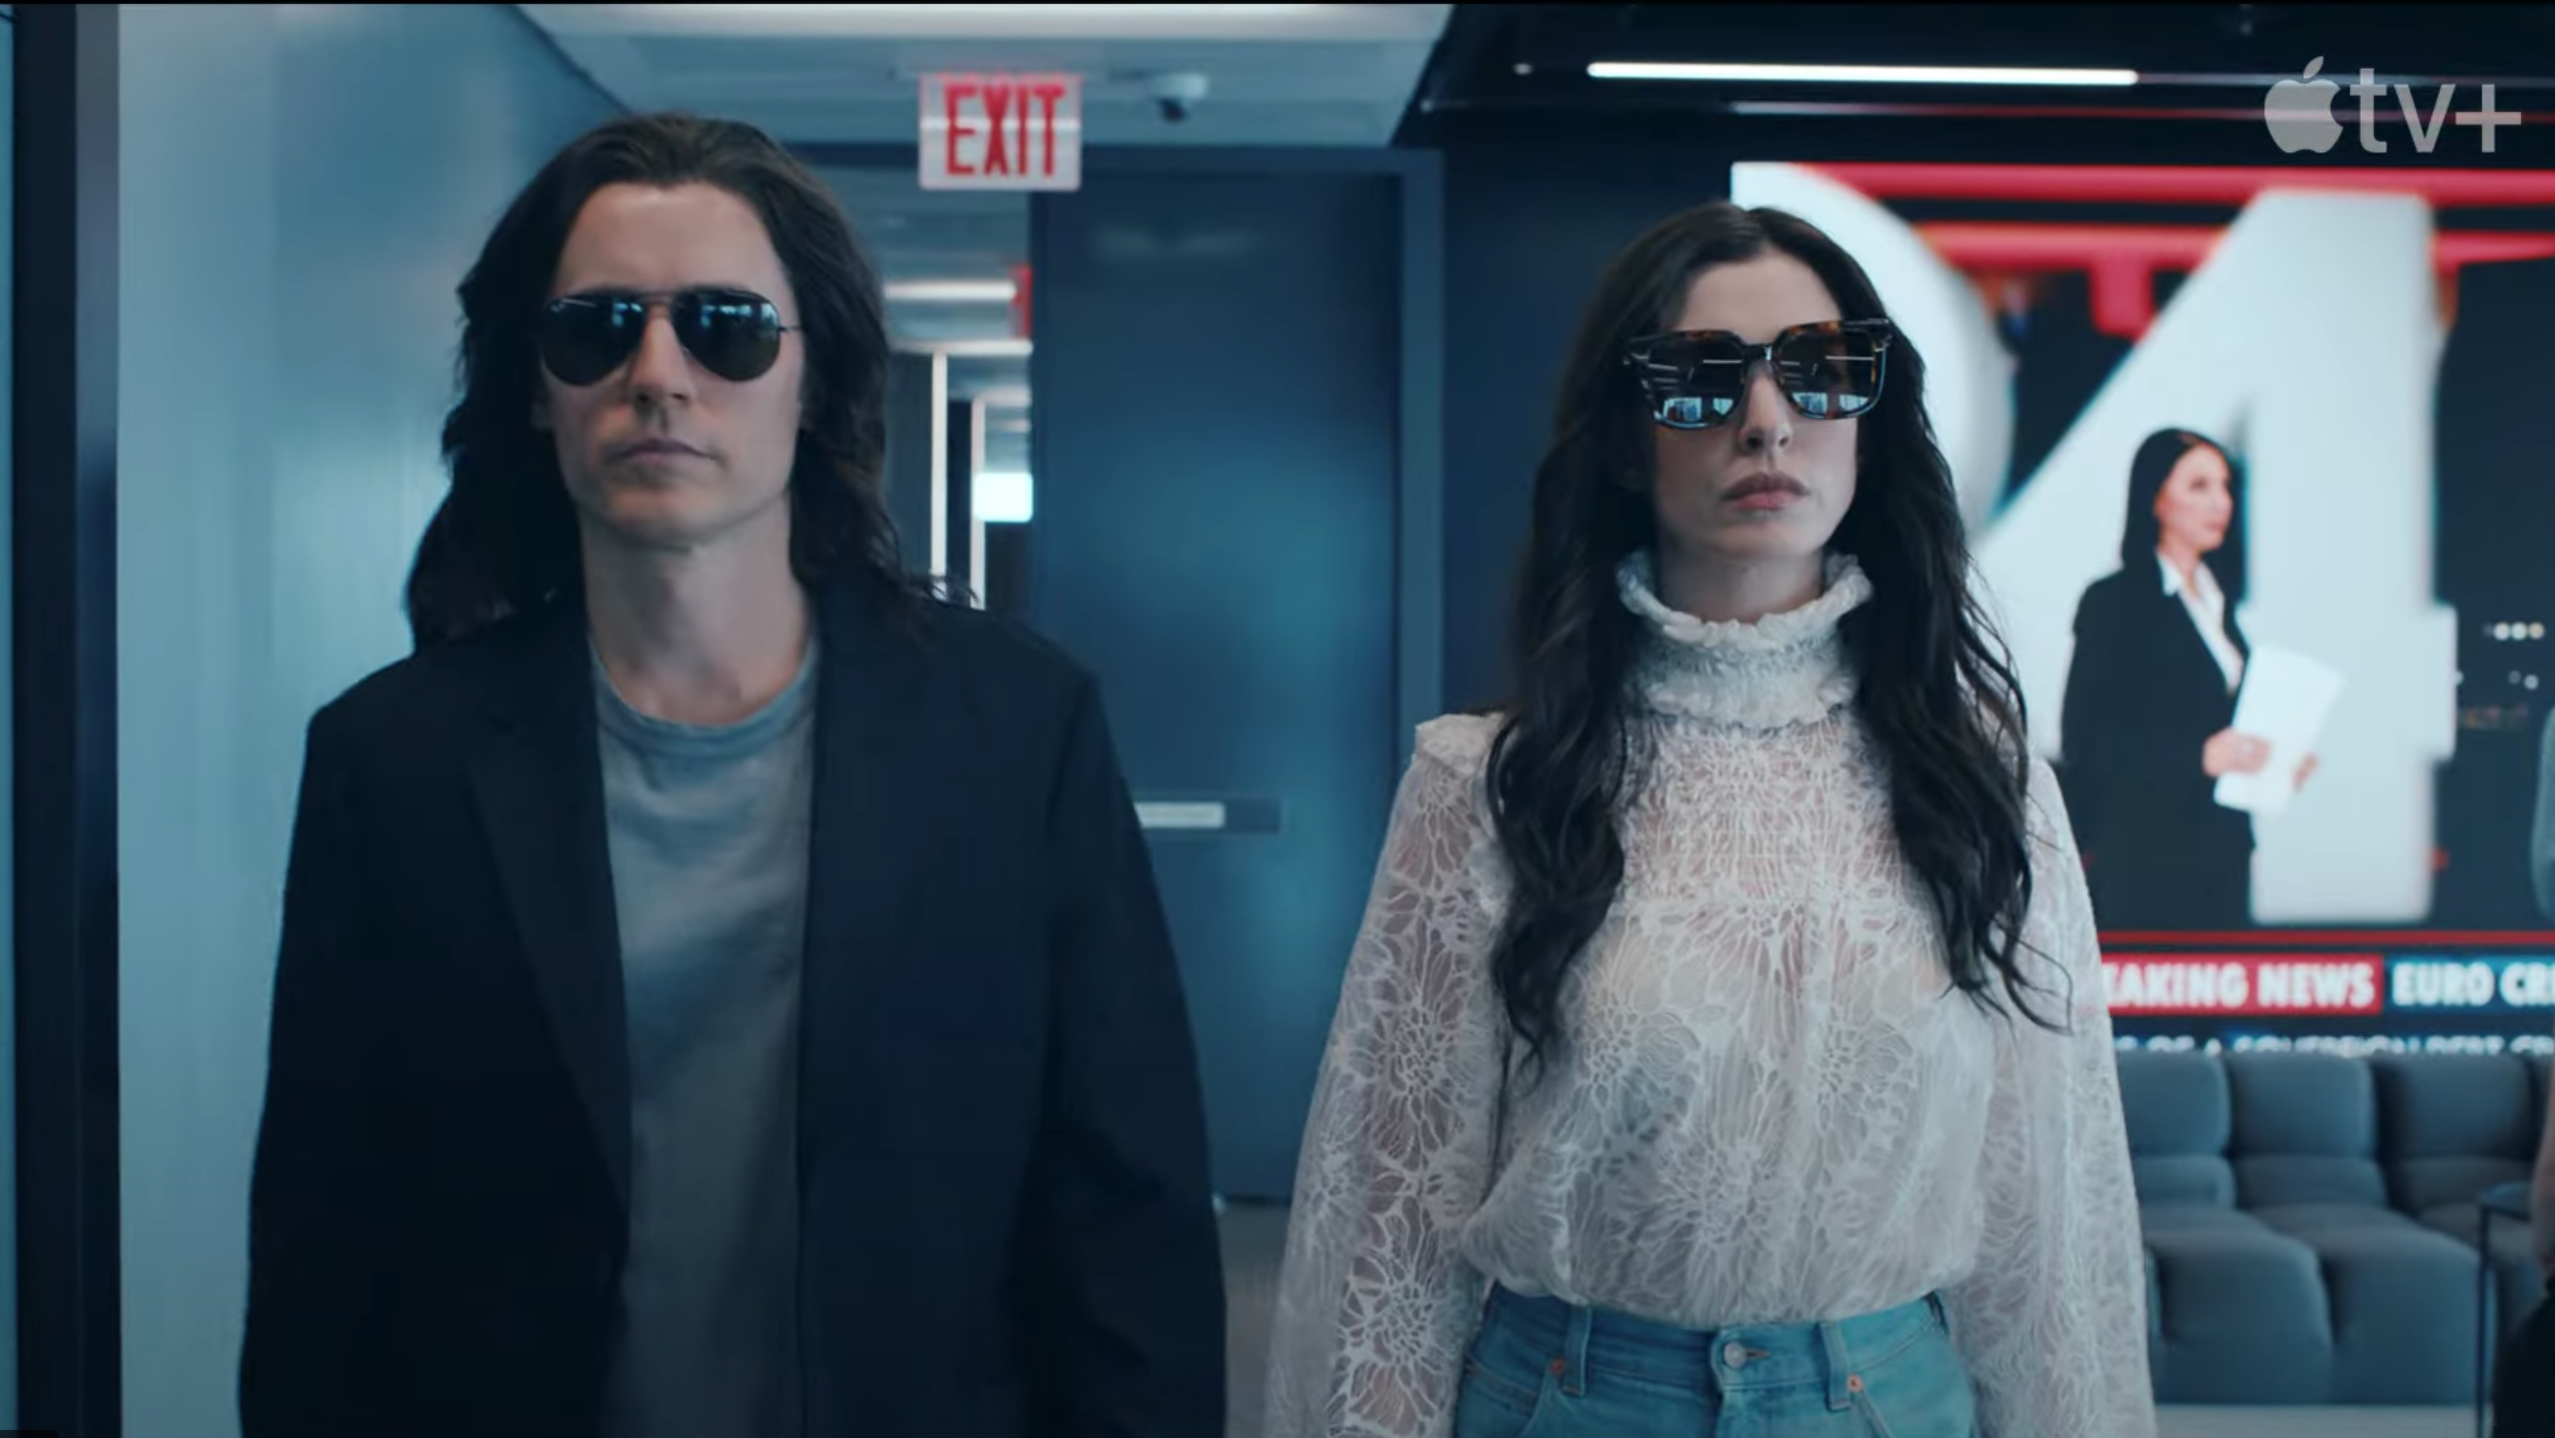 Jared Leto is Anne Hathaway’s “supernova” in the trailer for Apple TV Plus’ WeCrashed